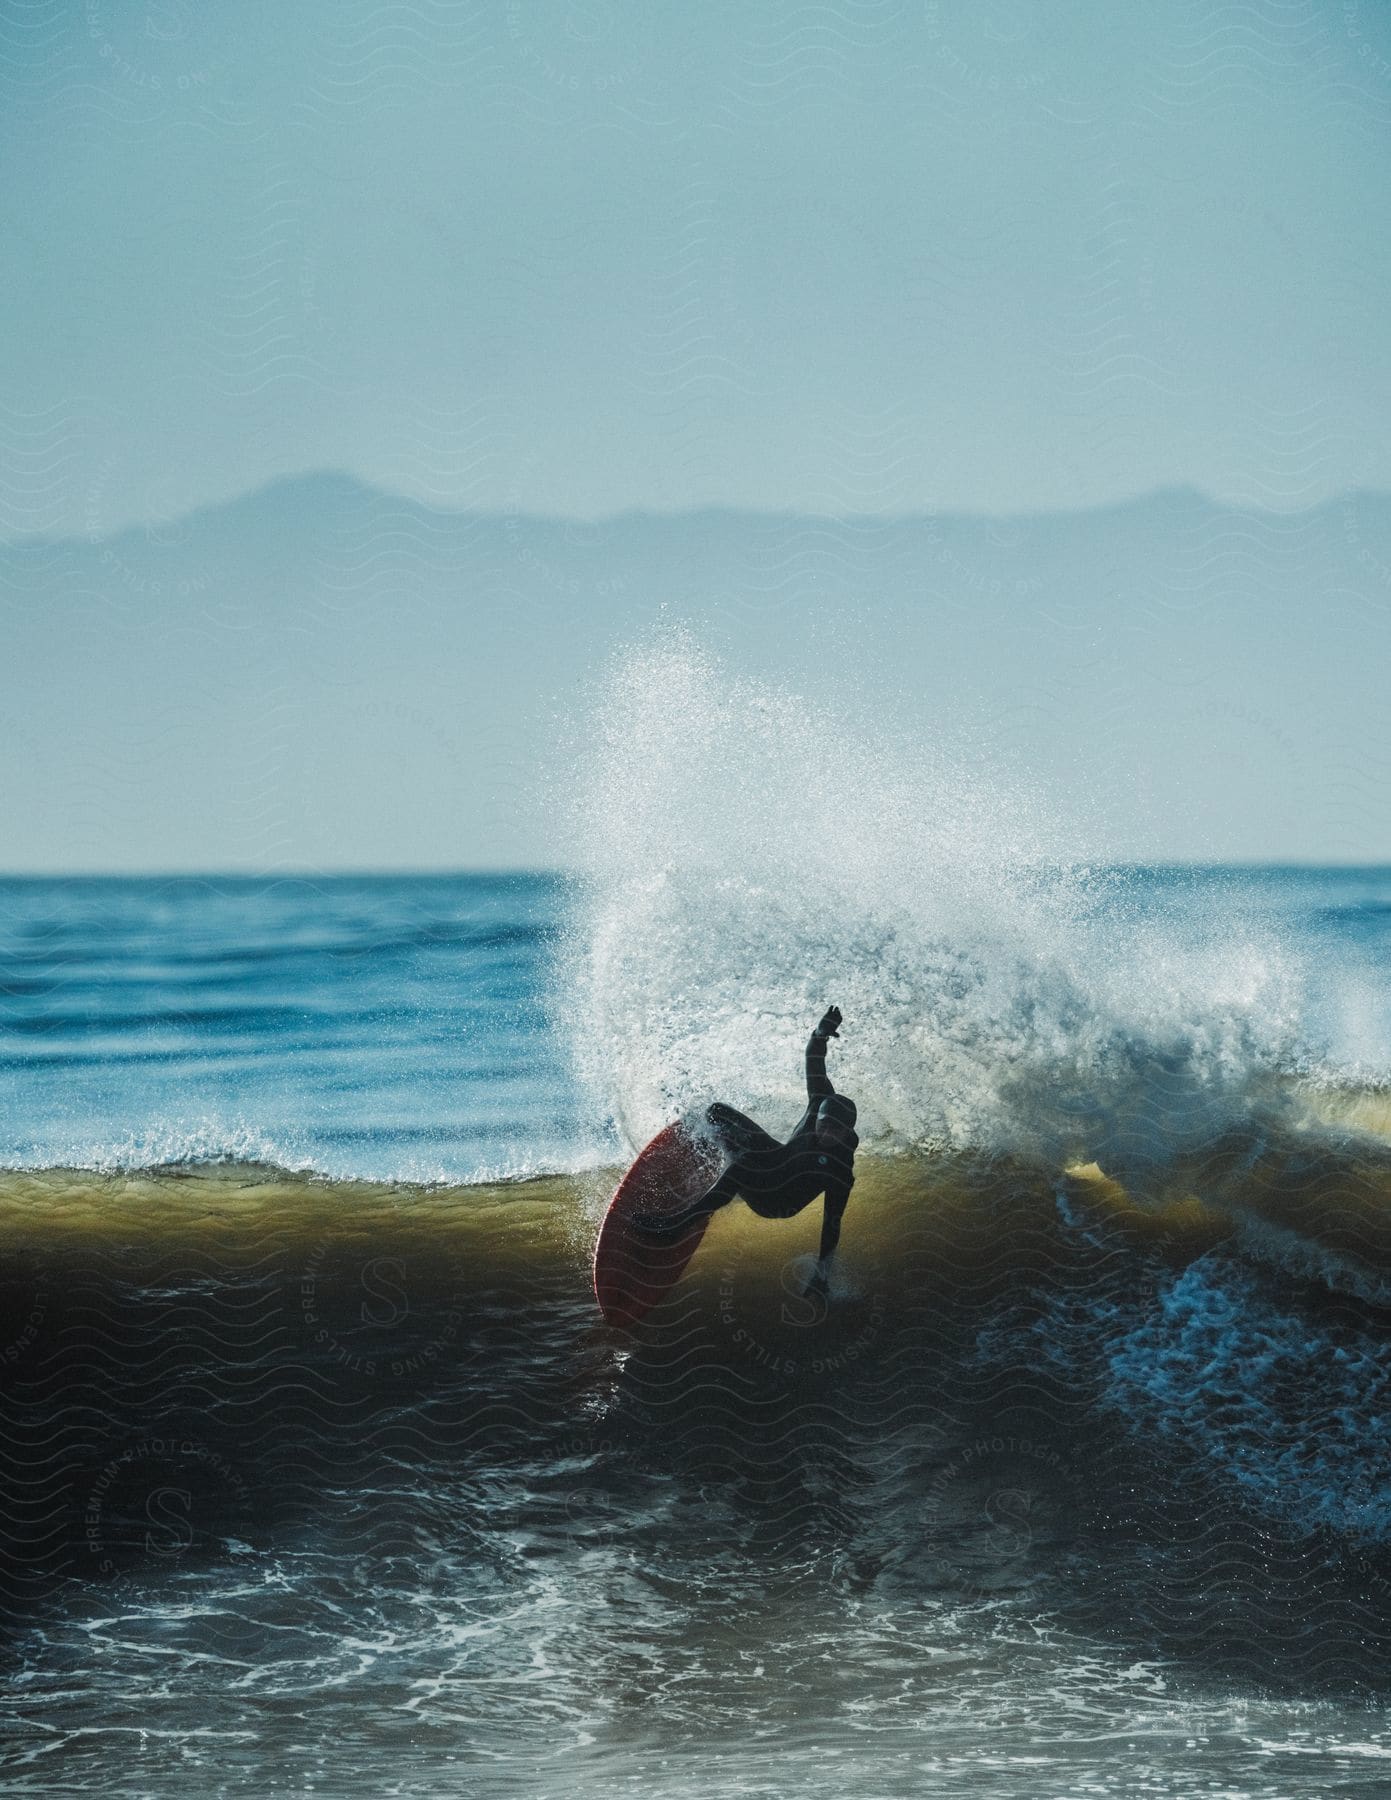 A determined man surfing a wave with mountains in the background